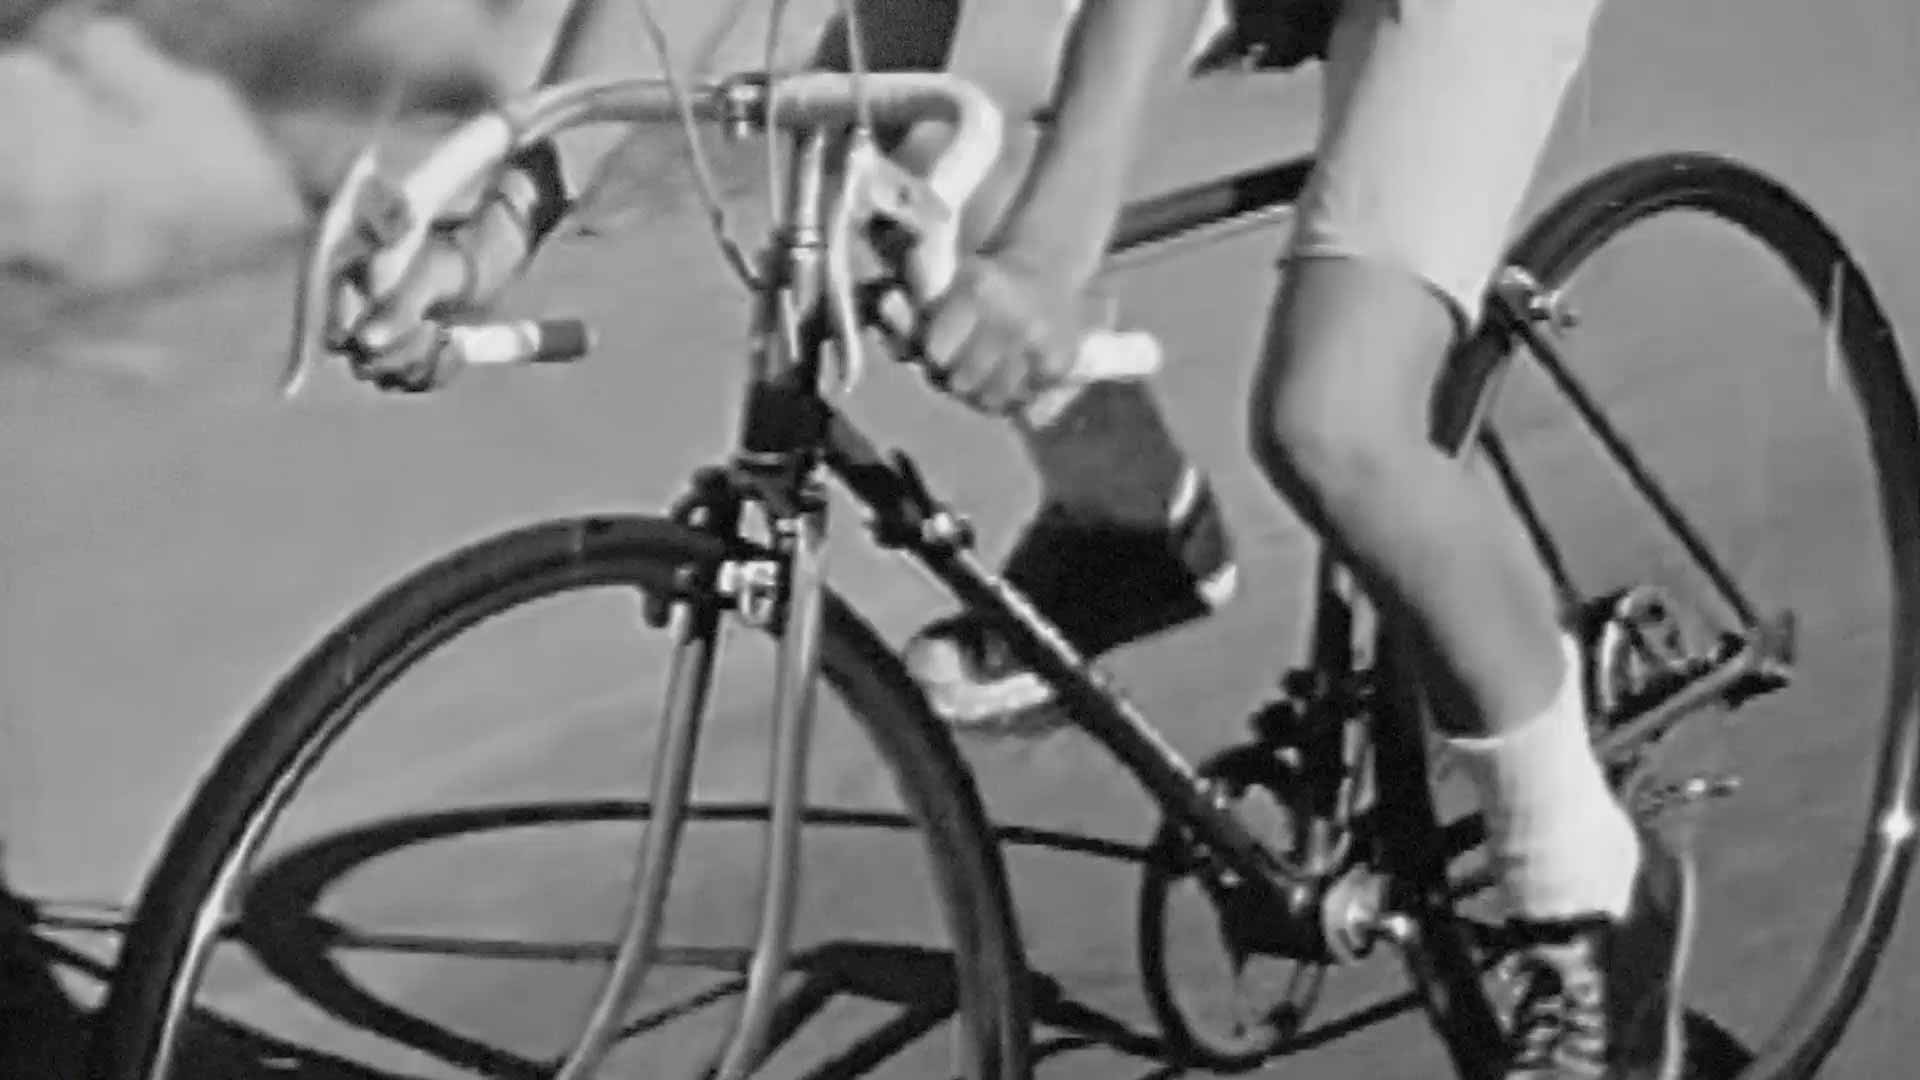 Retro, black and white footage of a bicycle.